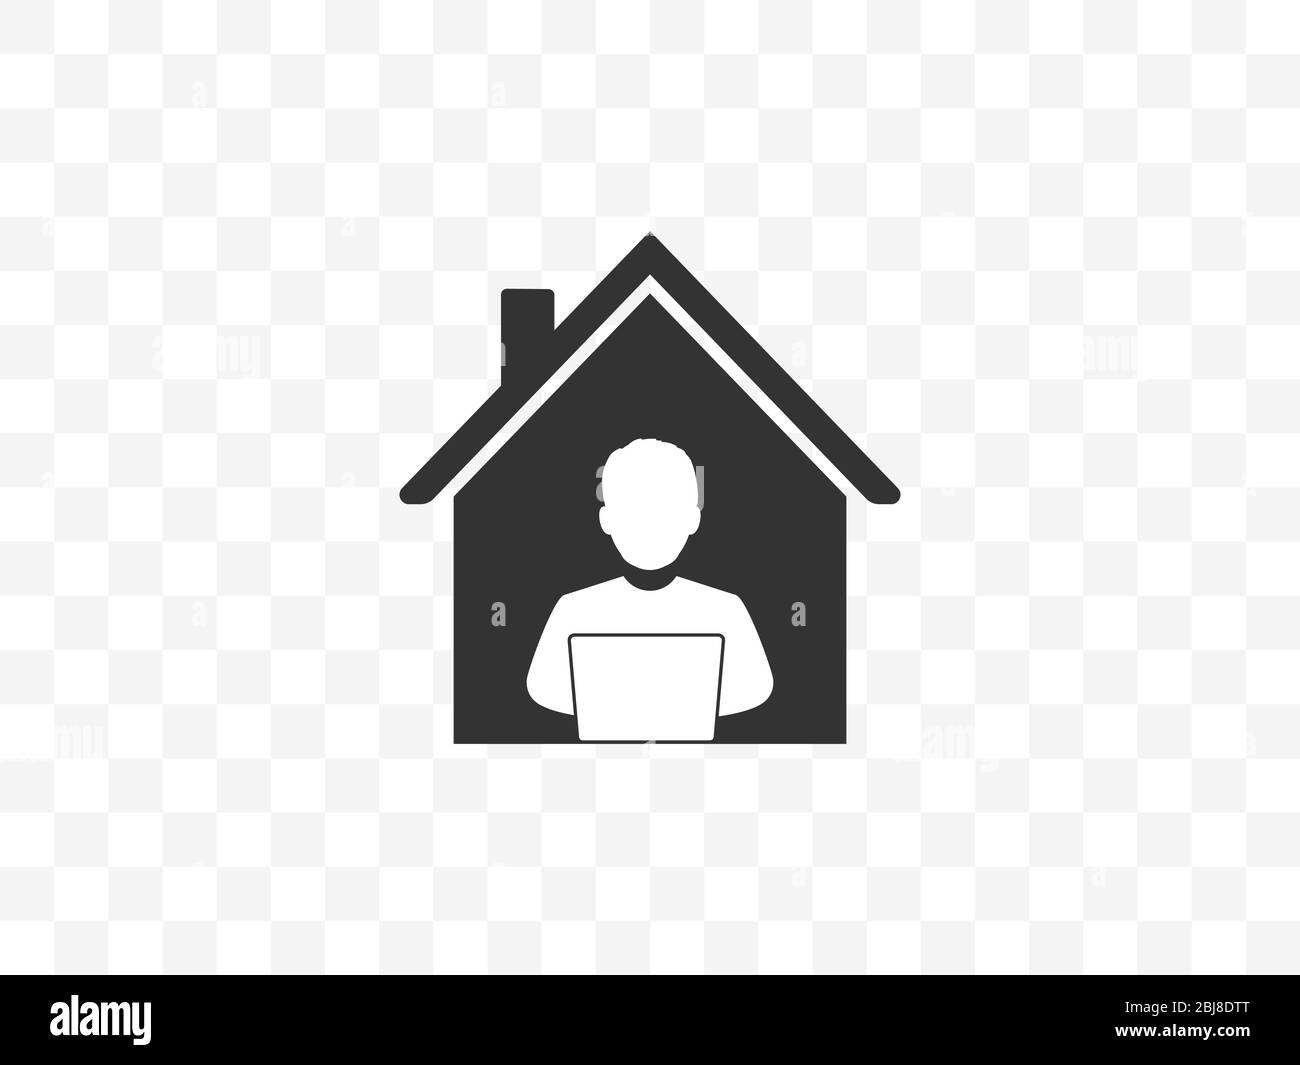 Work at home icon. Vector illustration, flat design. Stock Vector